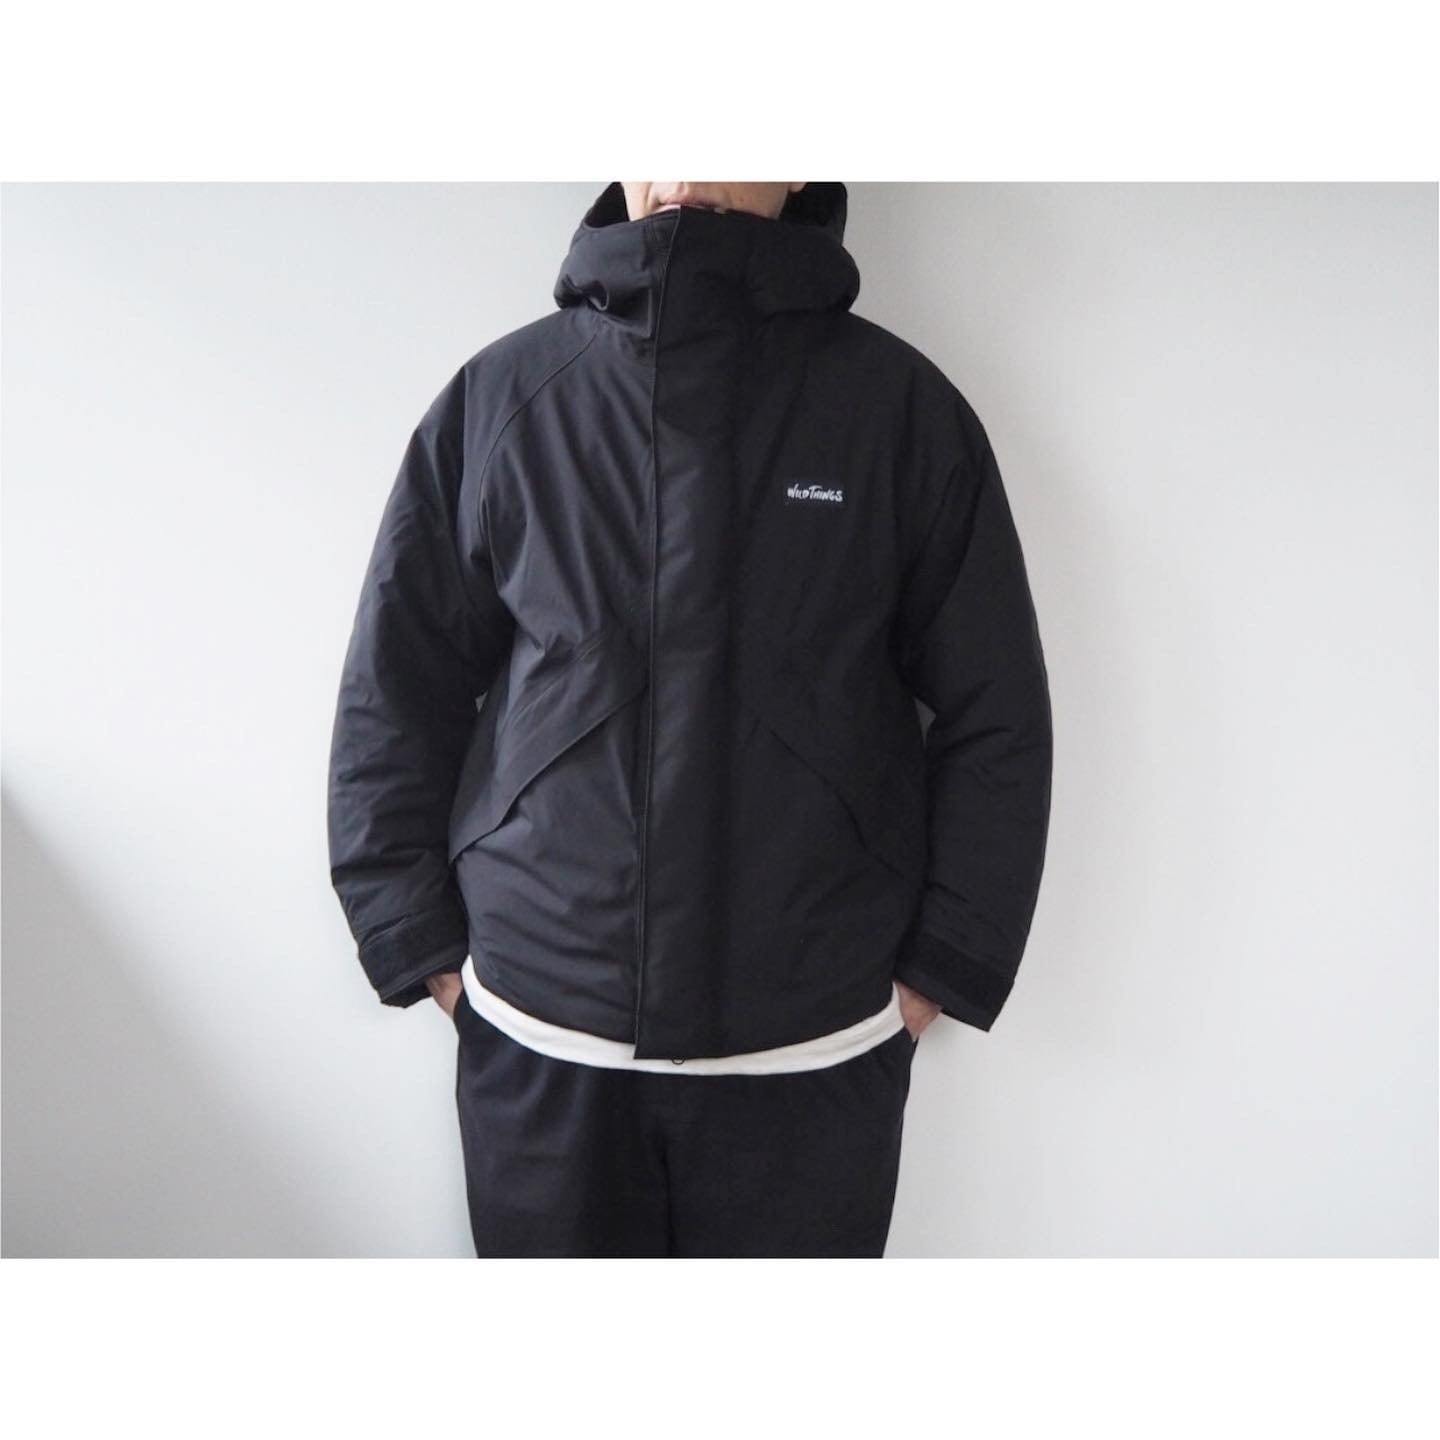 WILD THINGS (ワイルドシングス) PERTEX DENALI Jacket | AUTHENTIC Life Store powered  by BASE